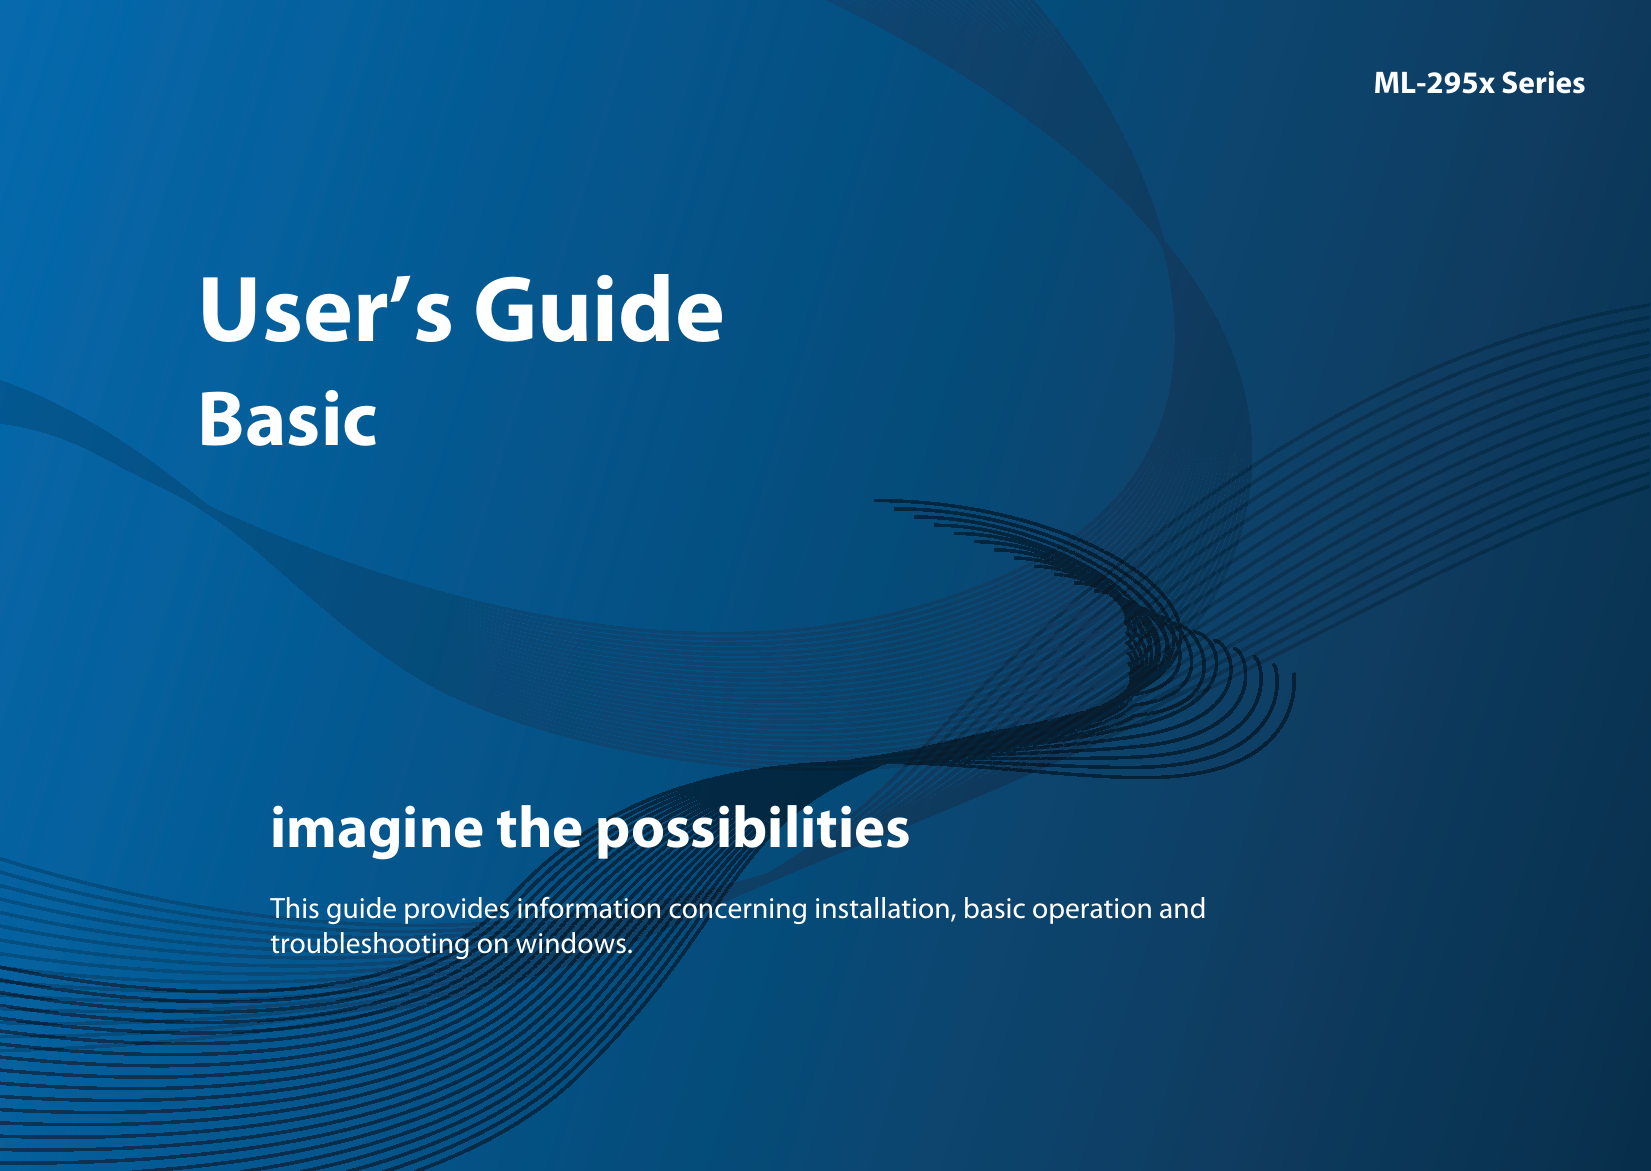 ML-295x SeriesUser’s GuideBasicimagine the possibilitiesThis guide provides information concerning installation, basic operation and troubleshooting on windows.